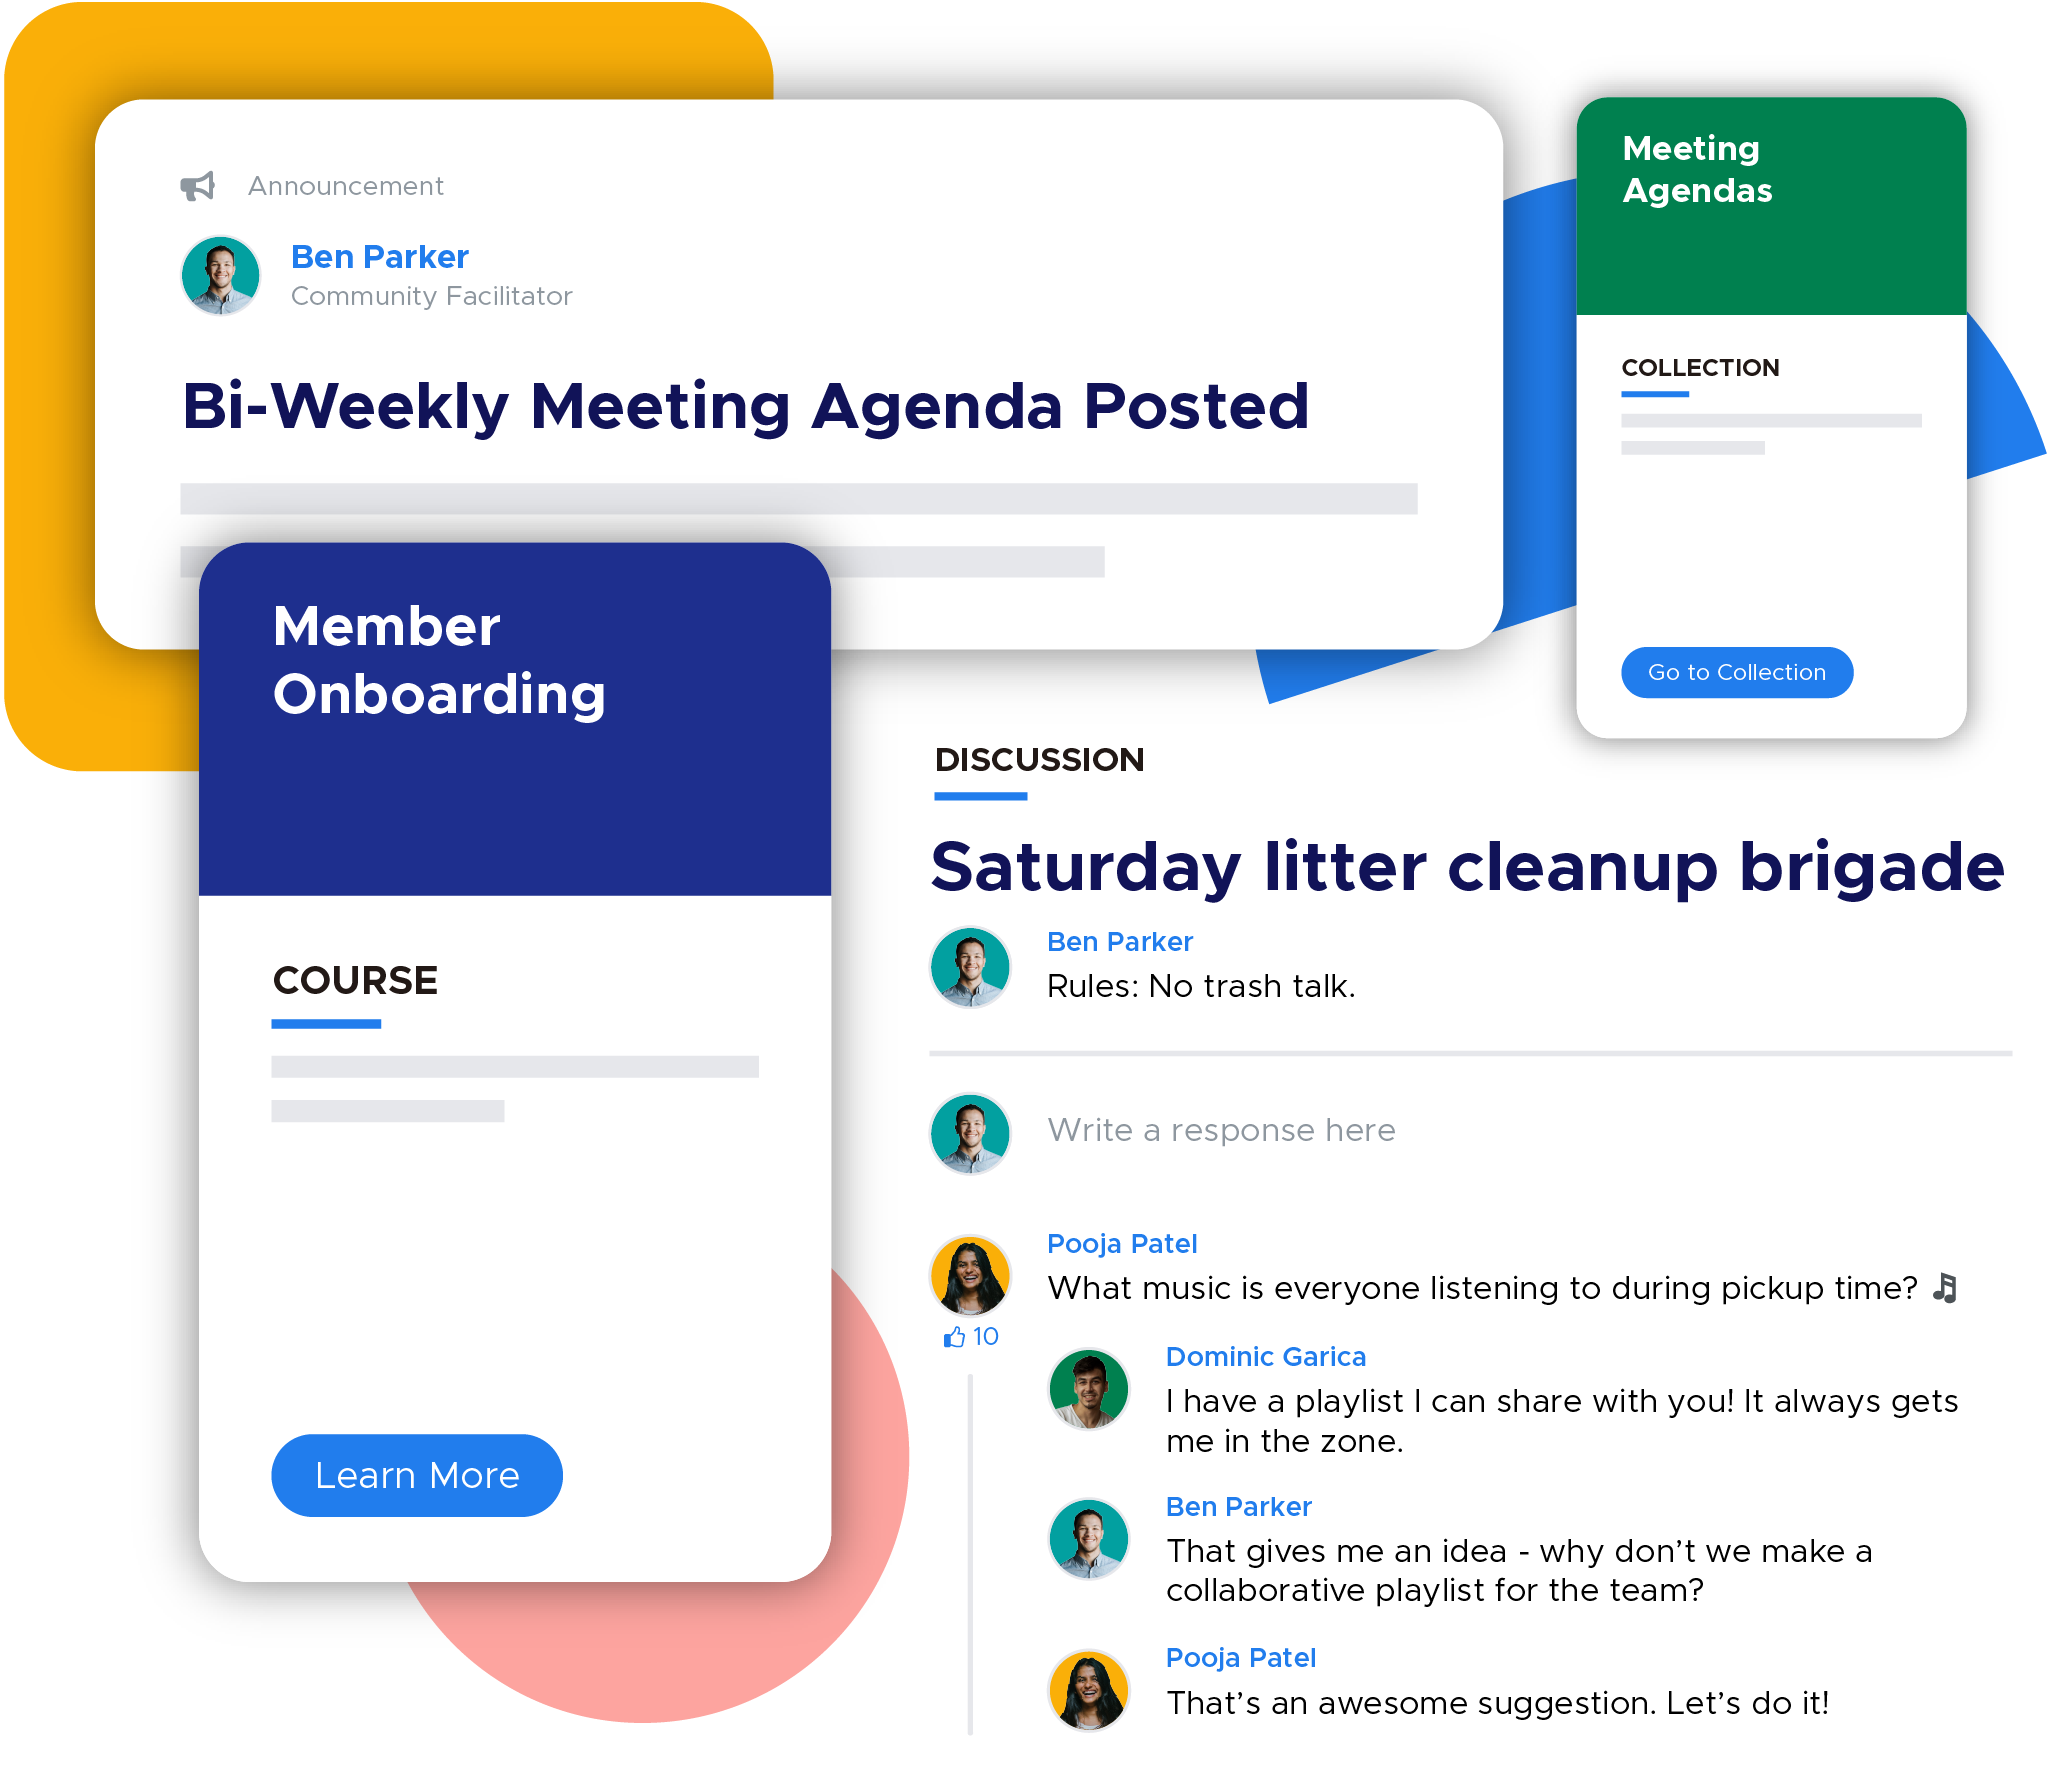 A collage of an announcement post about sharing the bi-weekly meeting agenda, a collection resource holding the meeting agenda documents, a member onboarding course card and a discussion with members about Saturday litter cleanup.